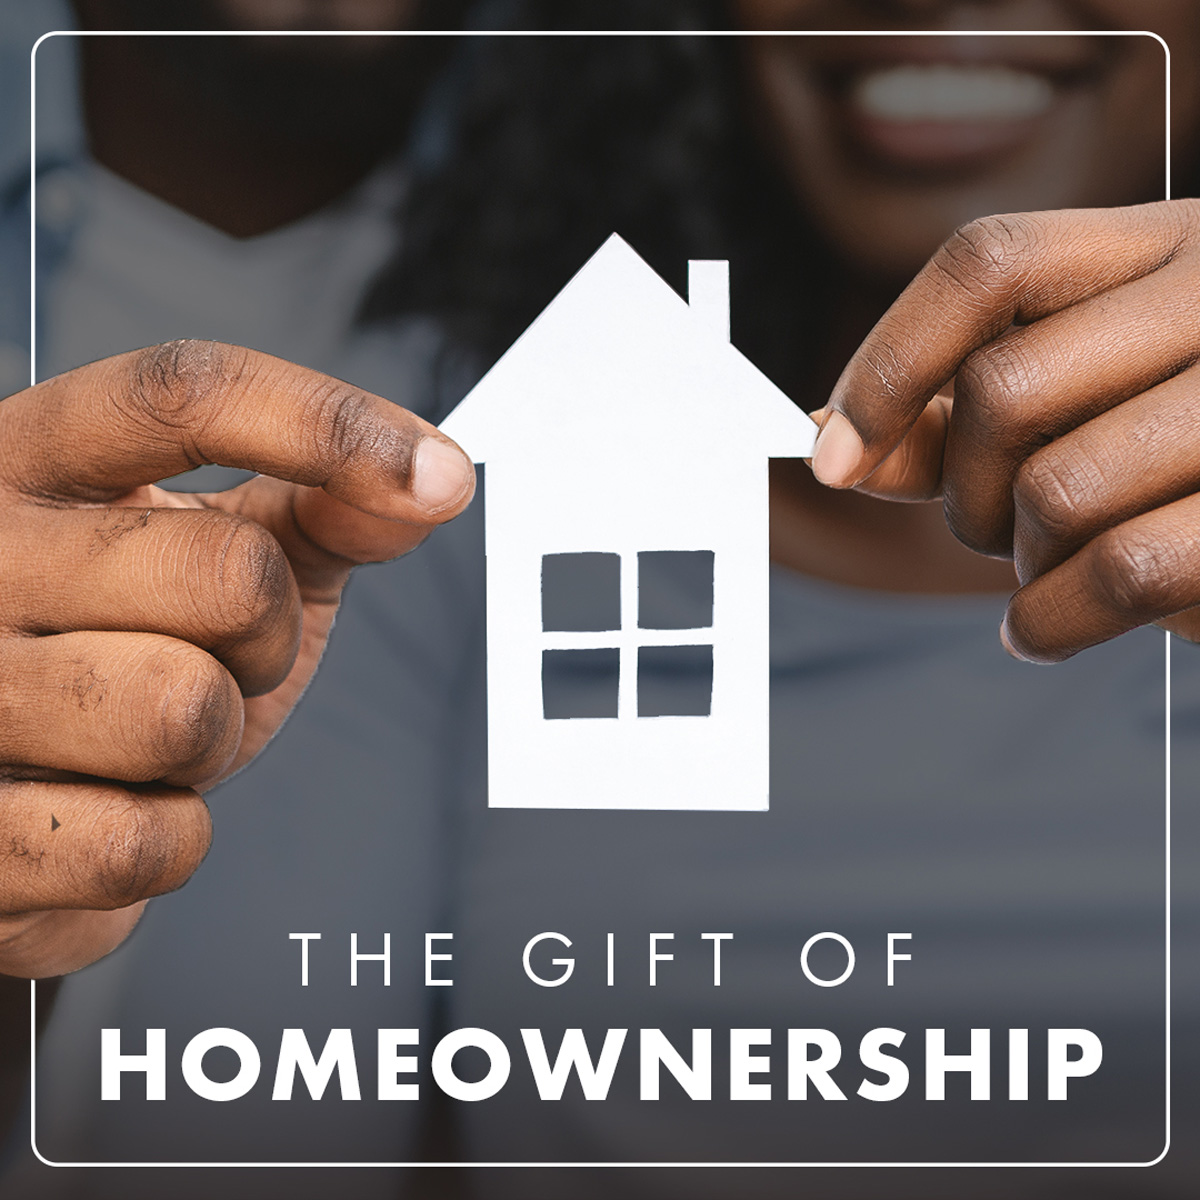 Looking to become a homeowner but struggling to save up for a down payment? Did you know the generosity of your loved ones can help make your dreams a reality! Call us today to learn more about how we can help you own your own home! #homeownership #giftfunds #familyassistance